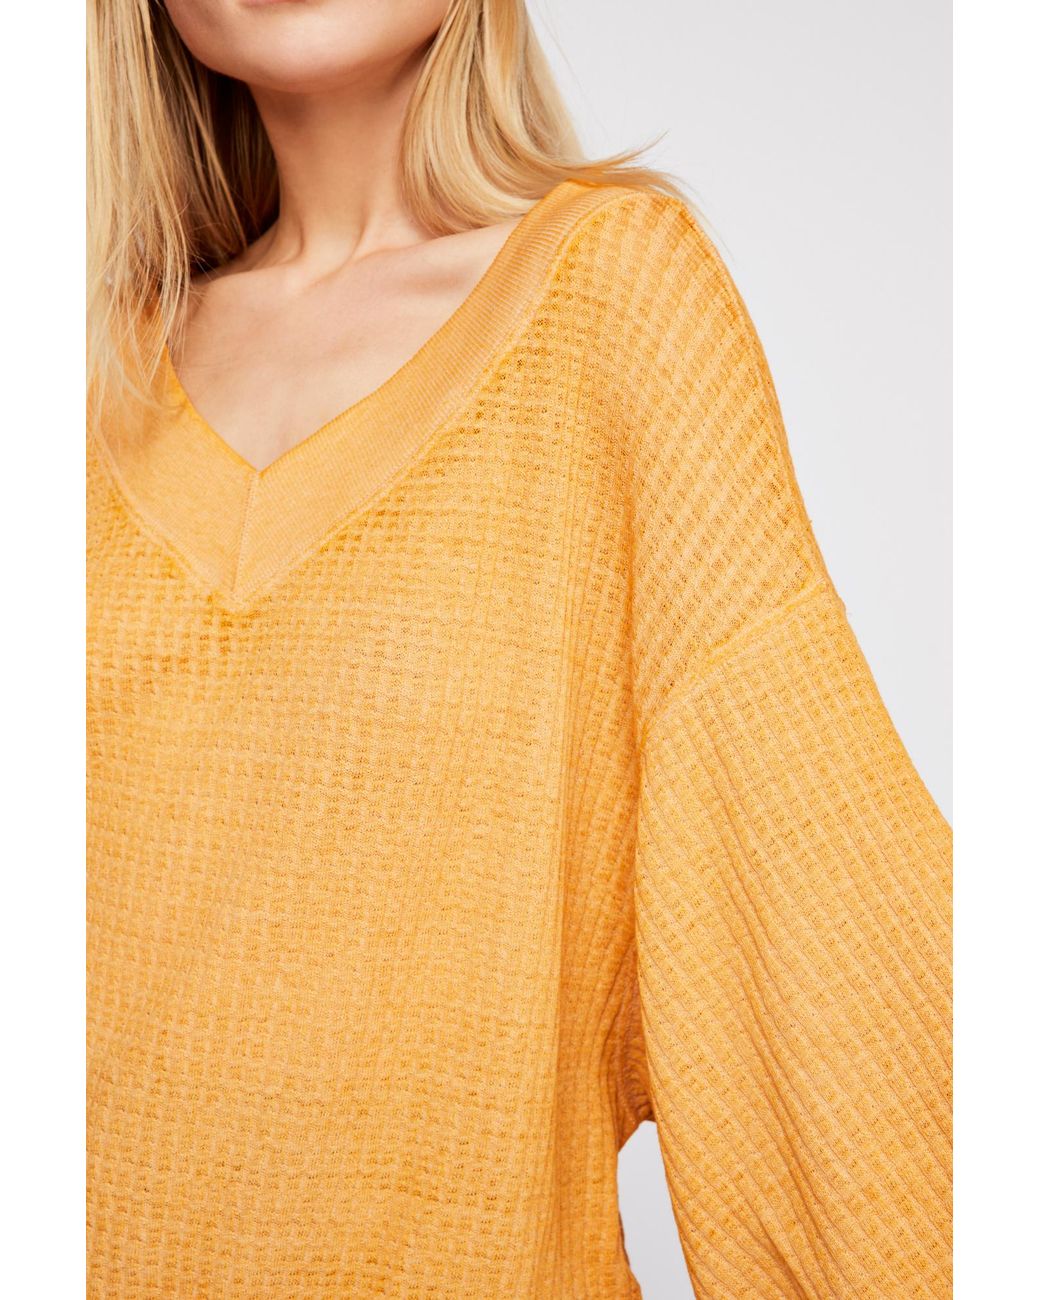 Free People We The Free South Side Thermal Top in Yellow | Lyst